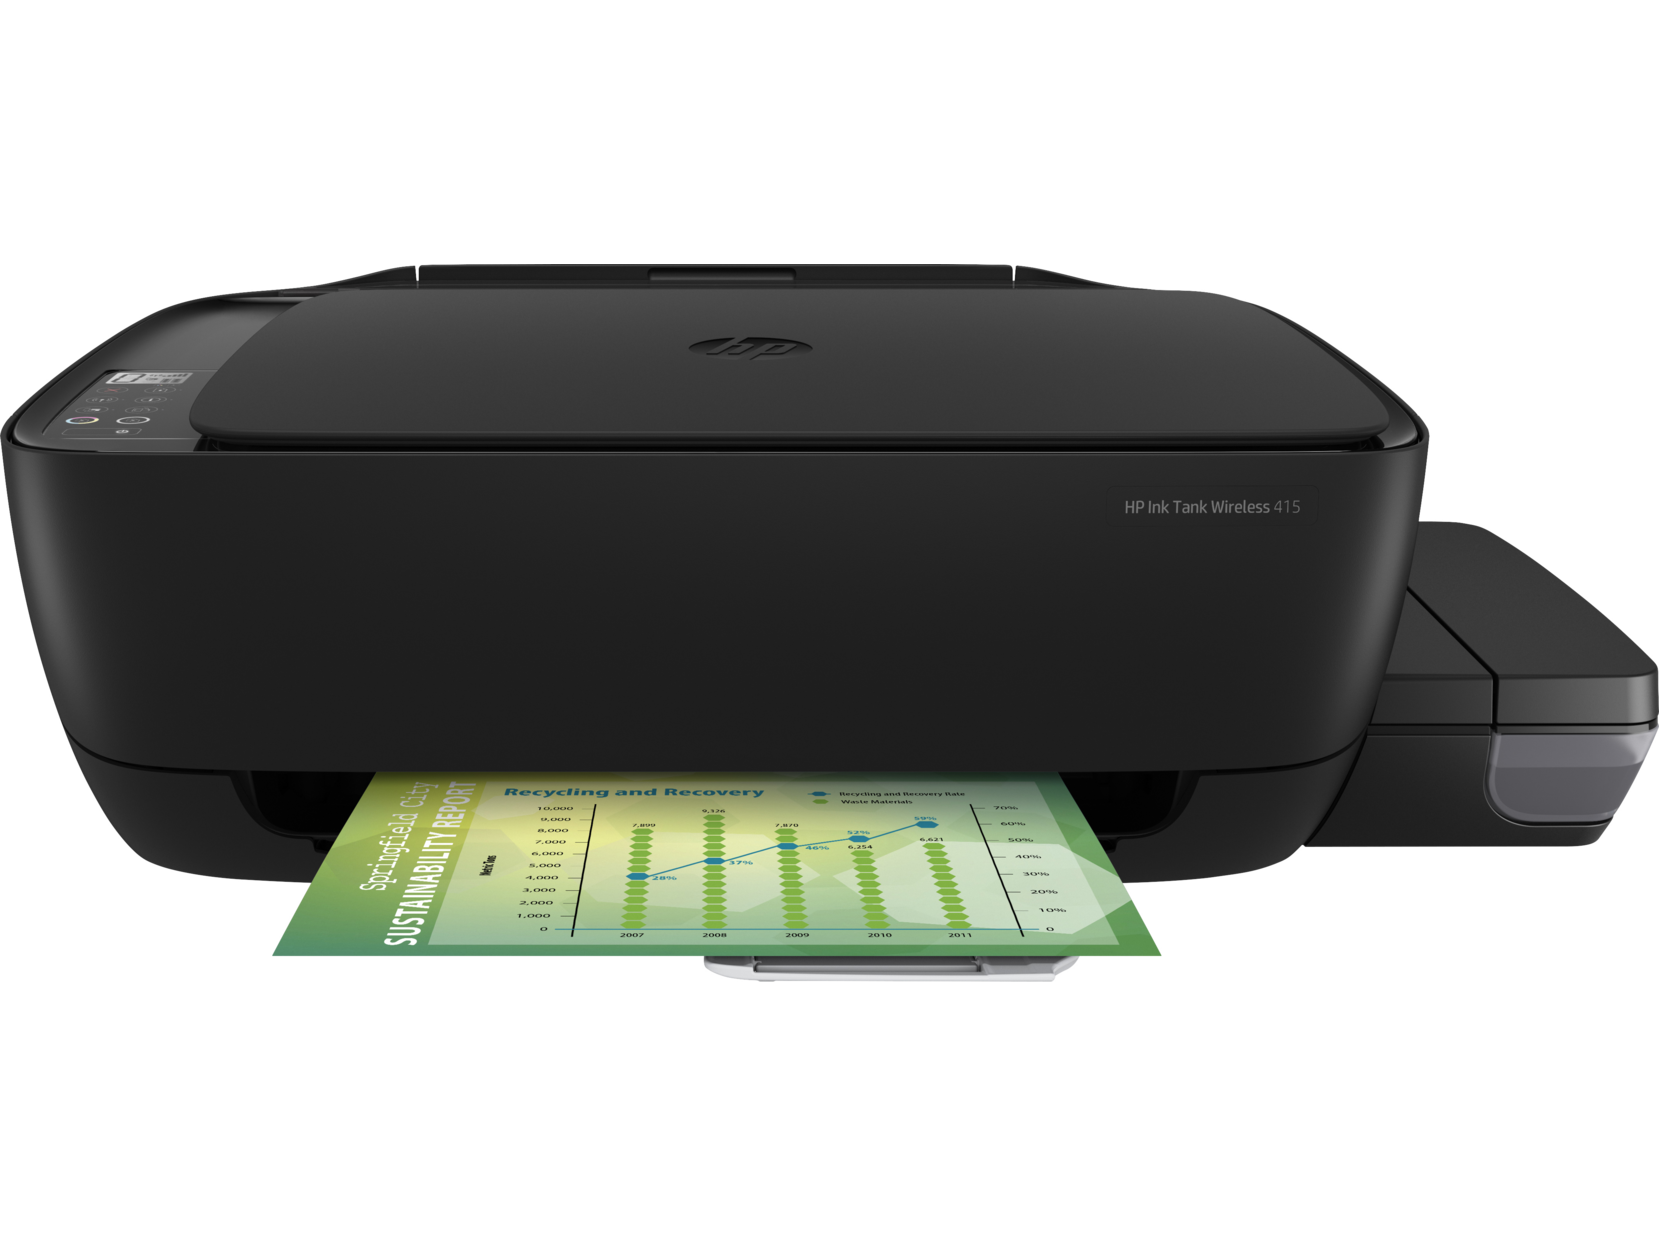 HP All-in-One Ink Tank Wireless 415 (A4/ 8/4 ppm/ USB/ Wi-Fi/ Print/ Scan/ Copy)